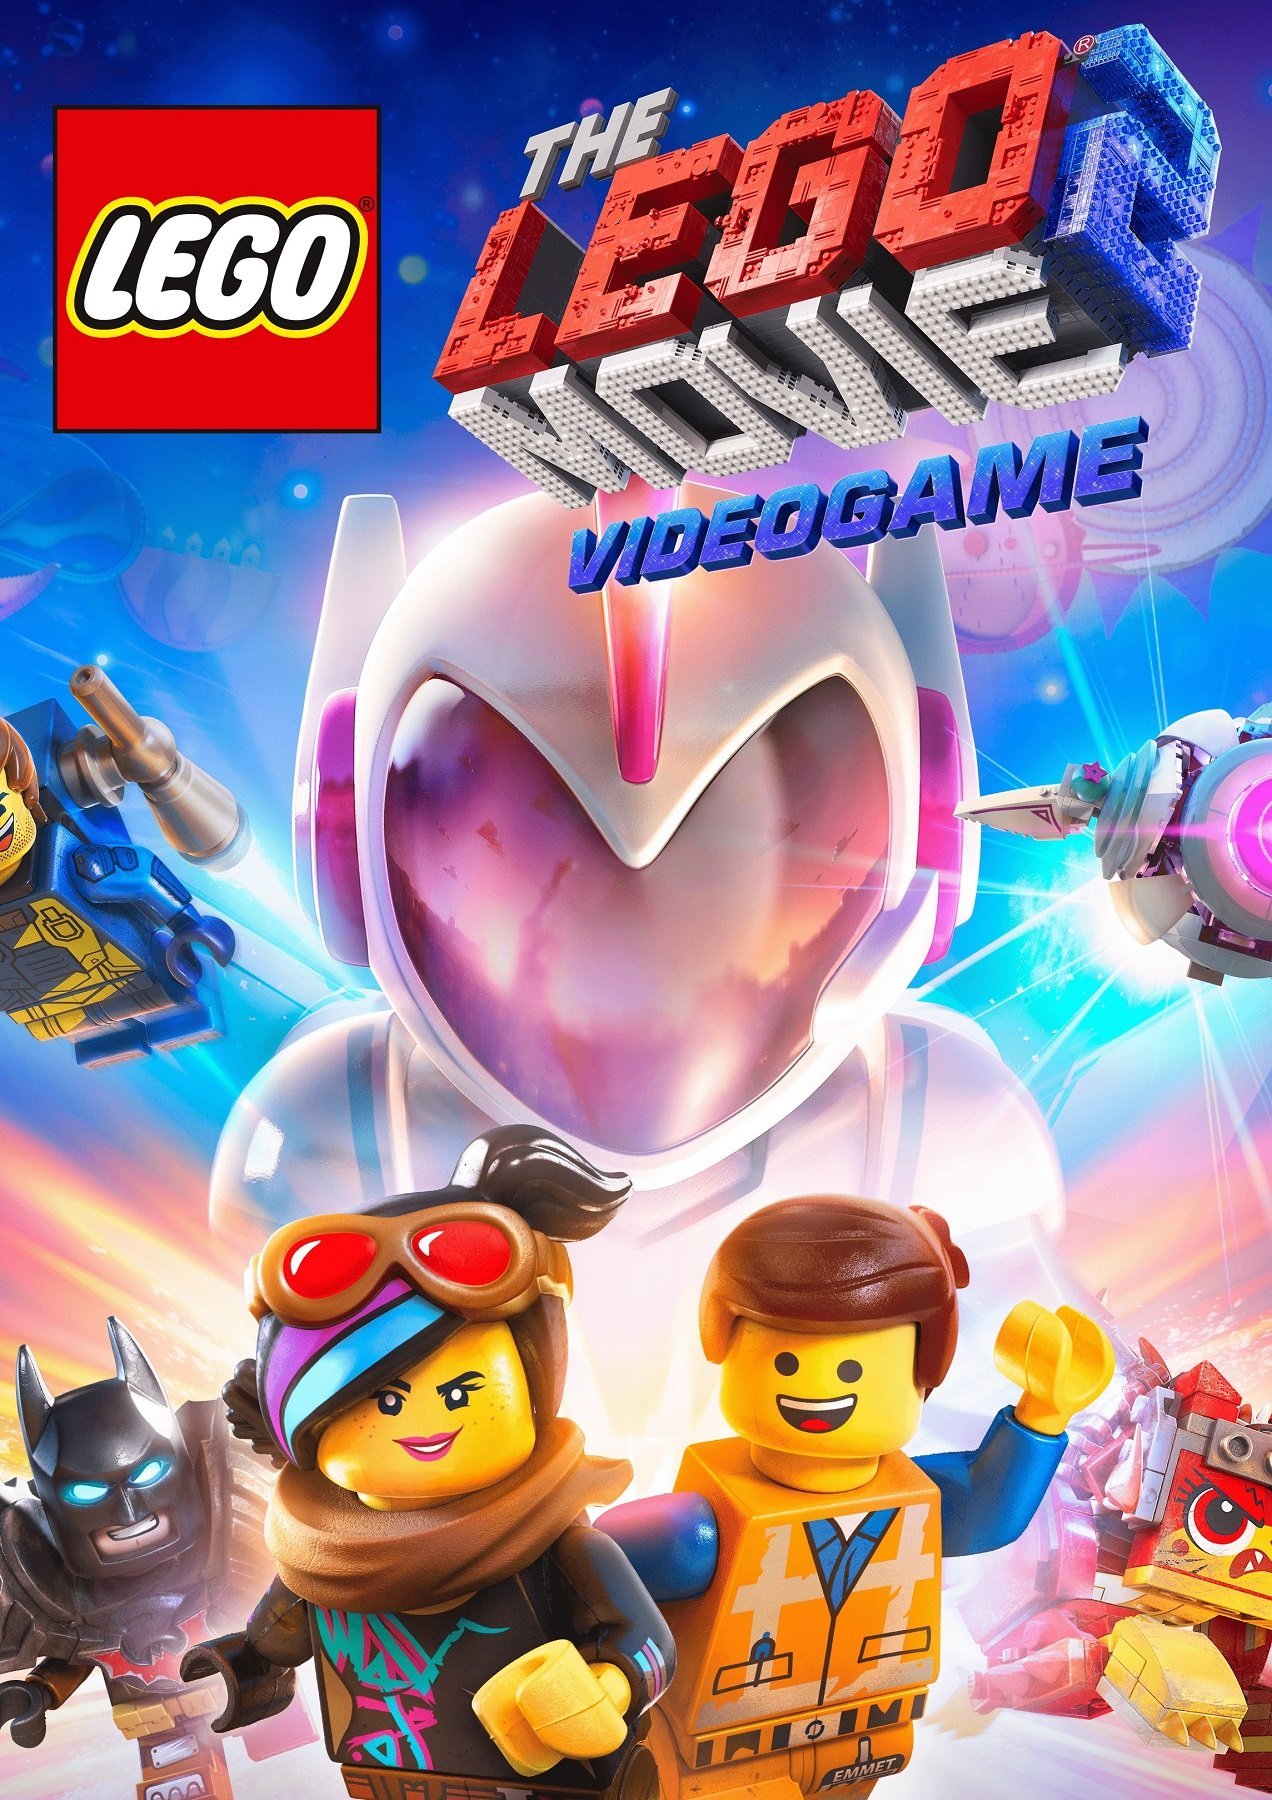 Image of The LEGO Movie 2 Videogame